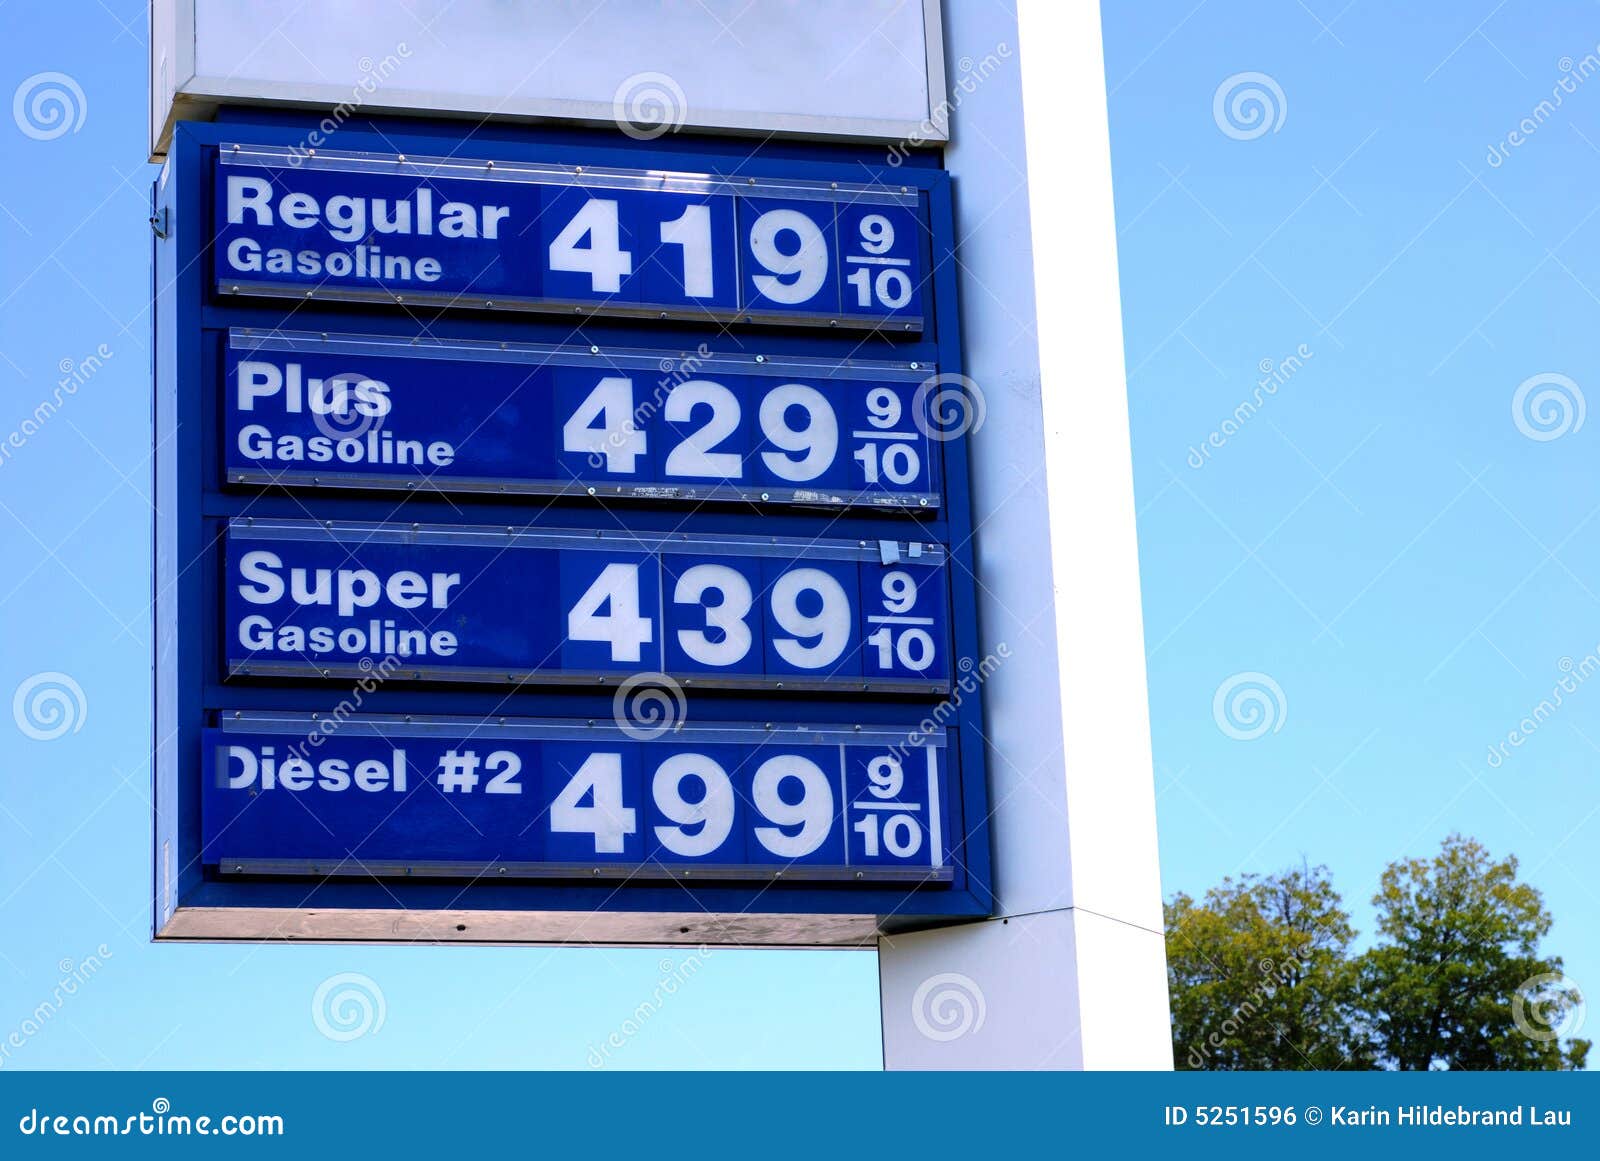 $4 gas prices